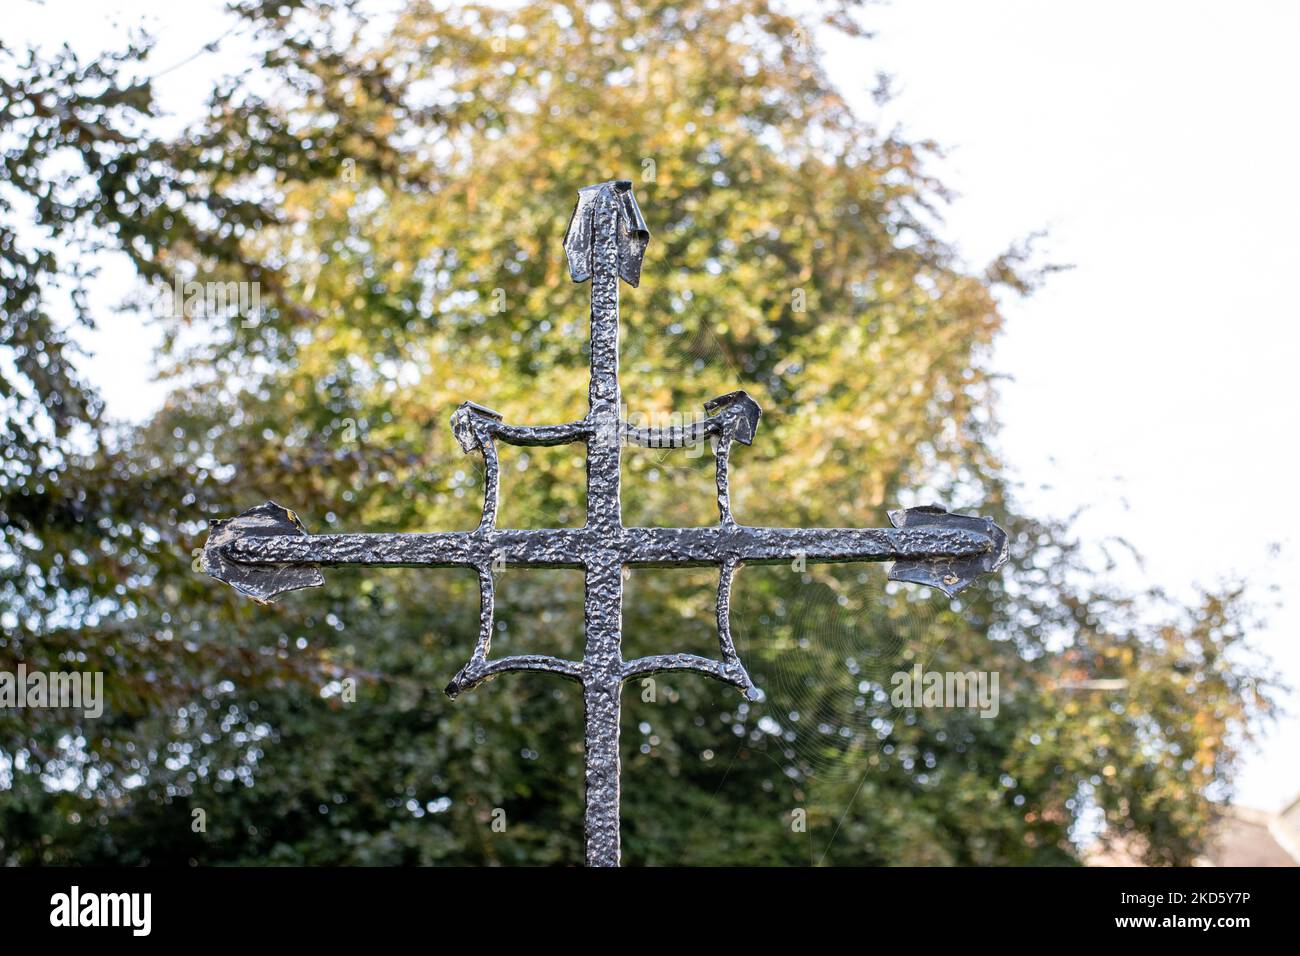 TER, DEVON, UK - SEPTEMBER 20, 2022 Exeter Cathedral - iron cross outside the Cathedral with trees in the background Stock Photo